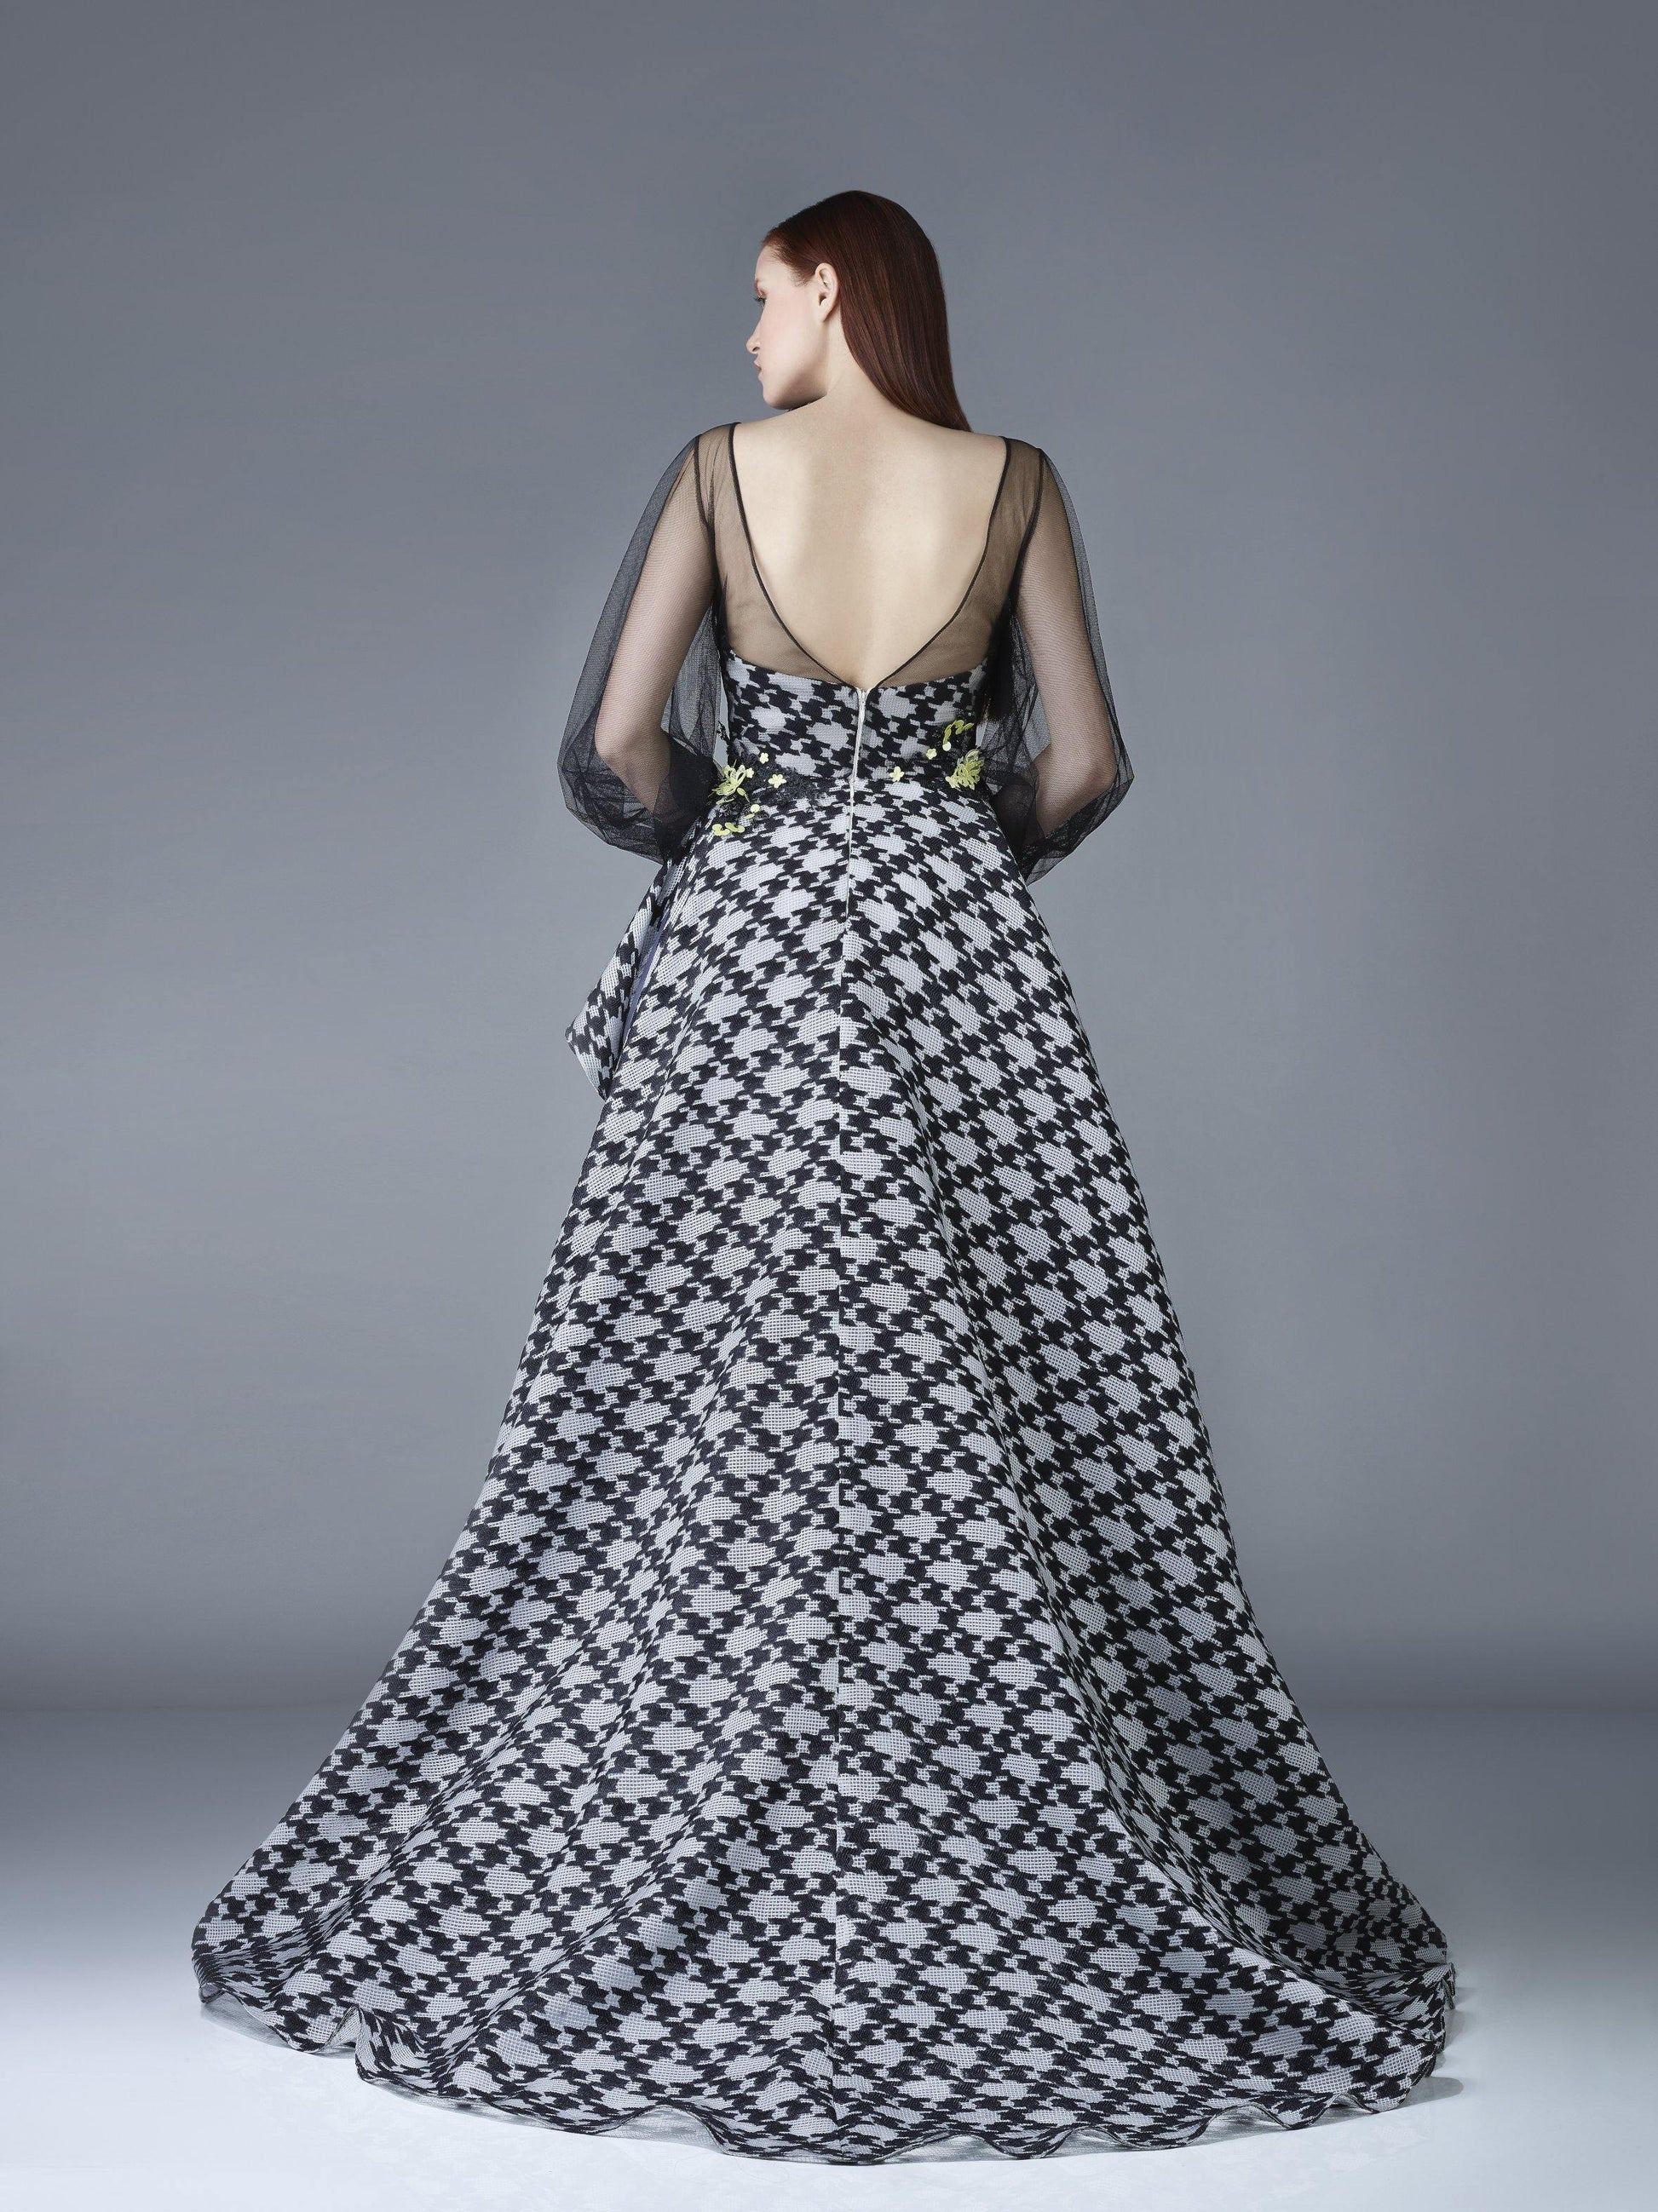 Gemy Maalouf Black and White Printed High-Low Dress - Rofial Beauty